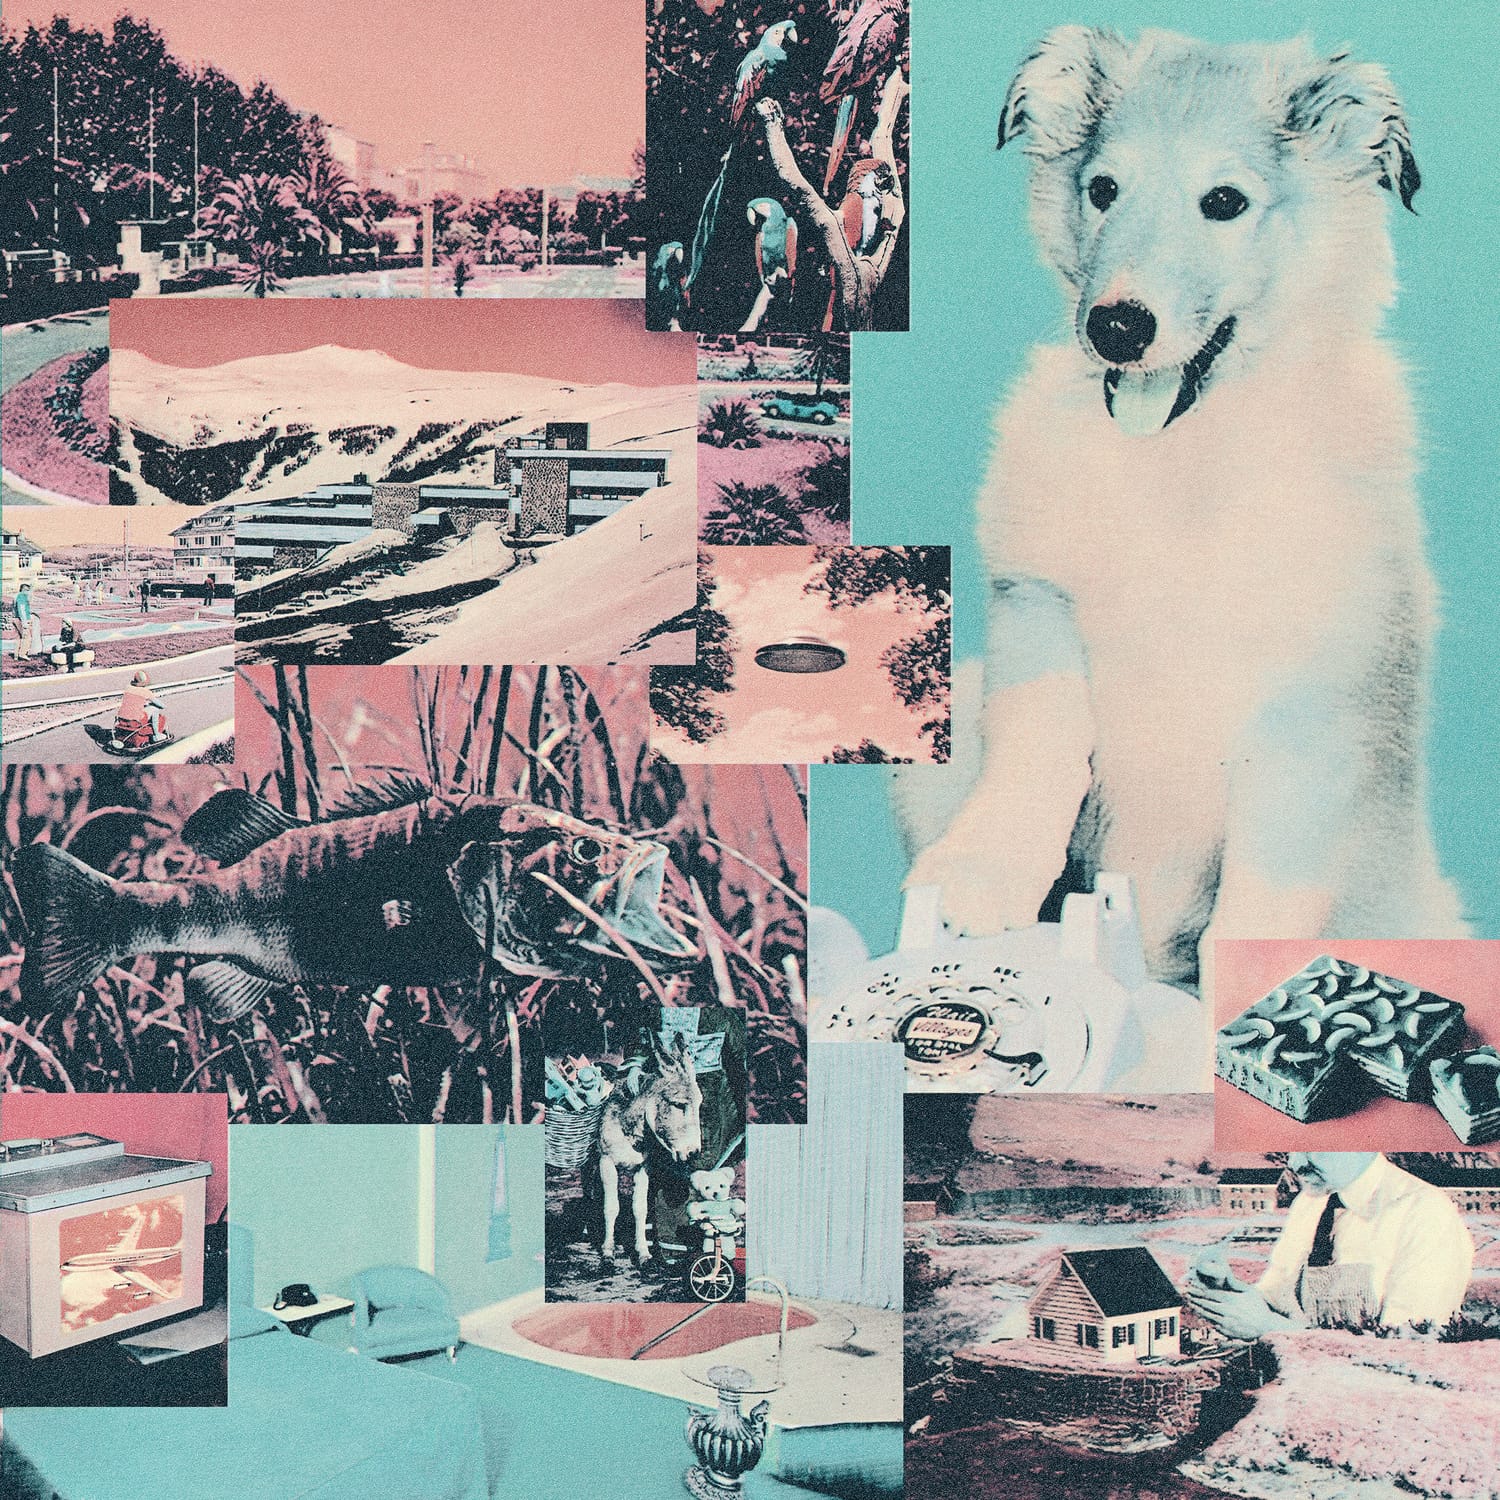 Cover of the Villages "EXCESSIVE DEMAND" LP showing a collage of multiple low-fi pictures in green / blue and red tone